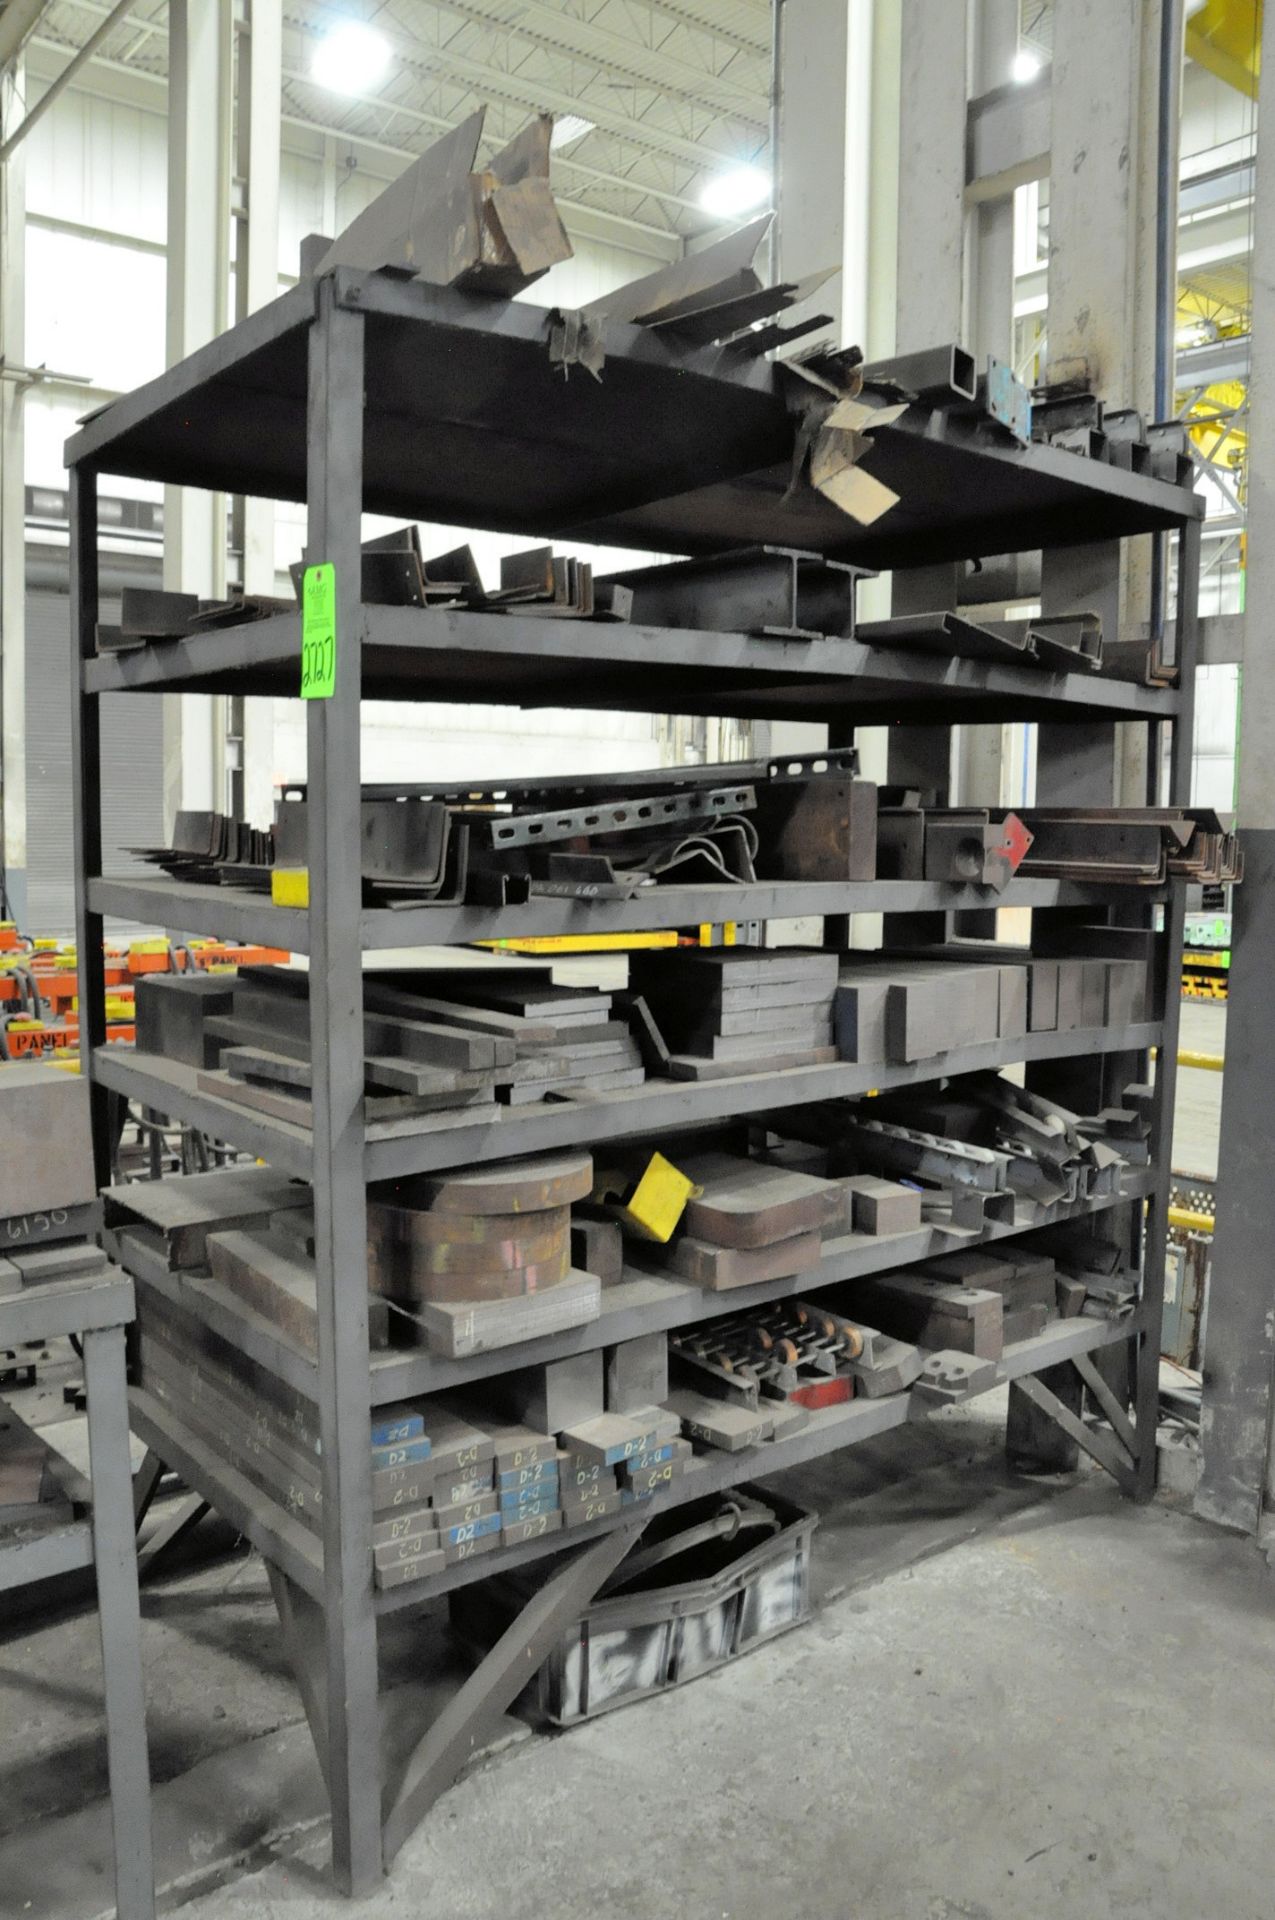 Lot-Solid Steel Cutoffs etc. with (5) Sections Shelving, (Warehouse Room), (Green Tag) - Image 5 of 6